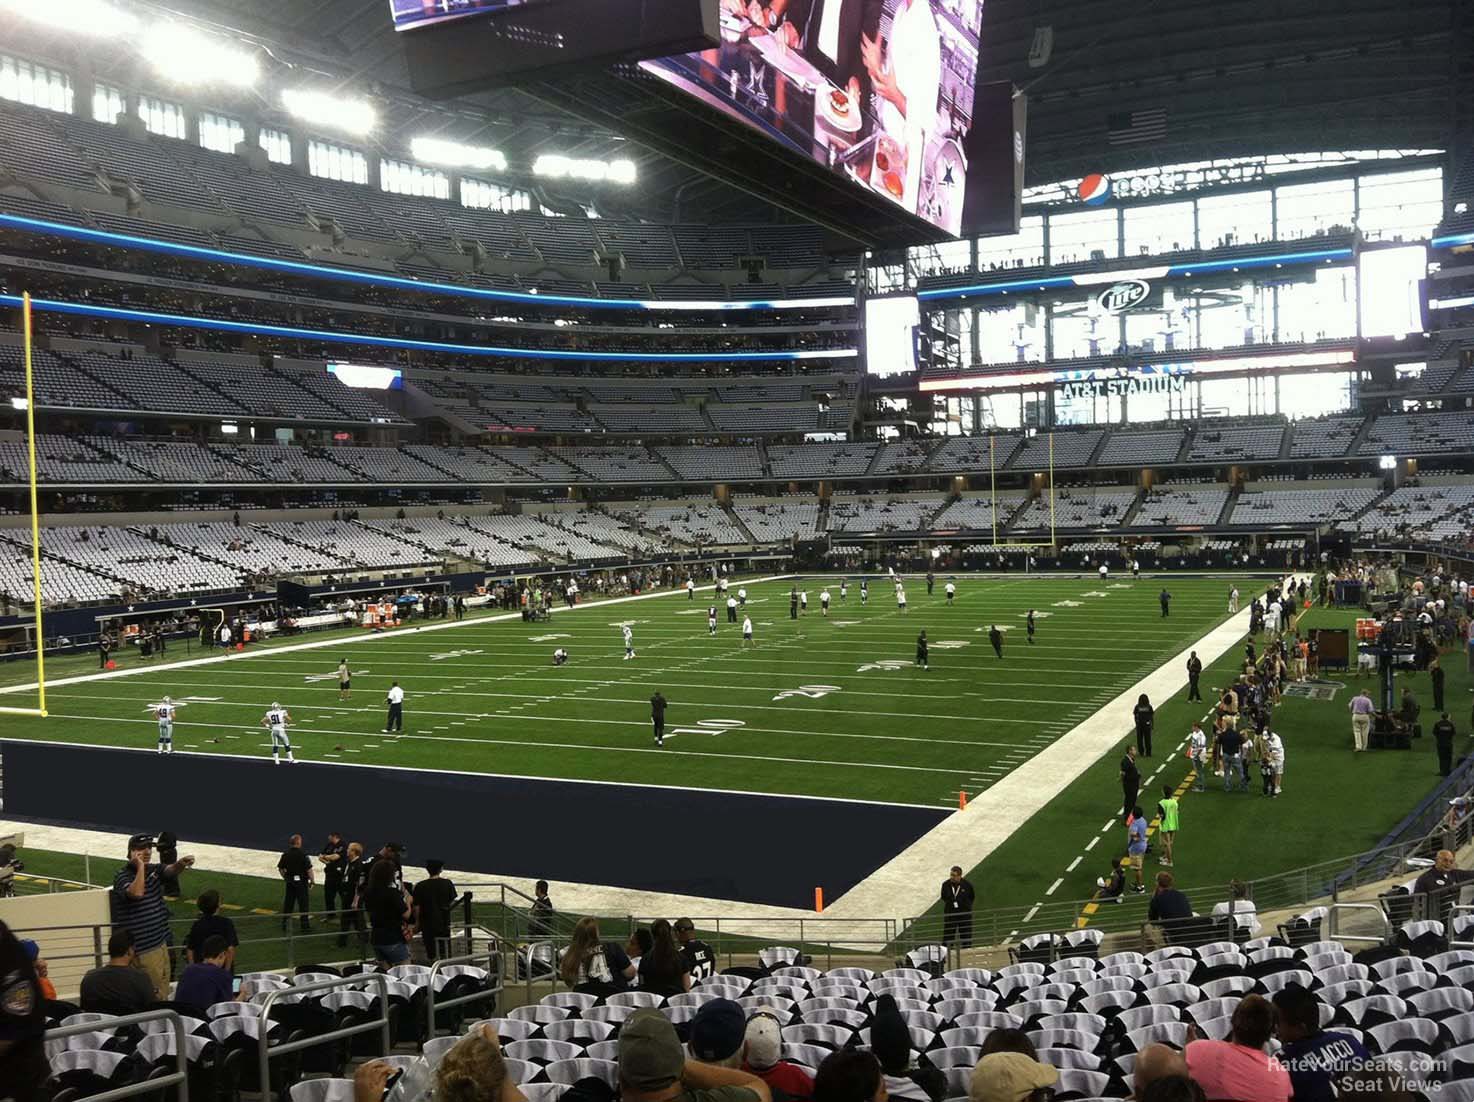 section 145, row 20 seat view  for football - at&t stadium (cowboys stadium)